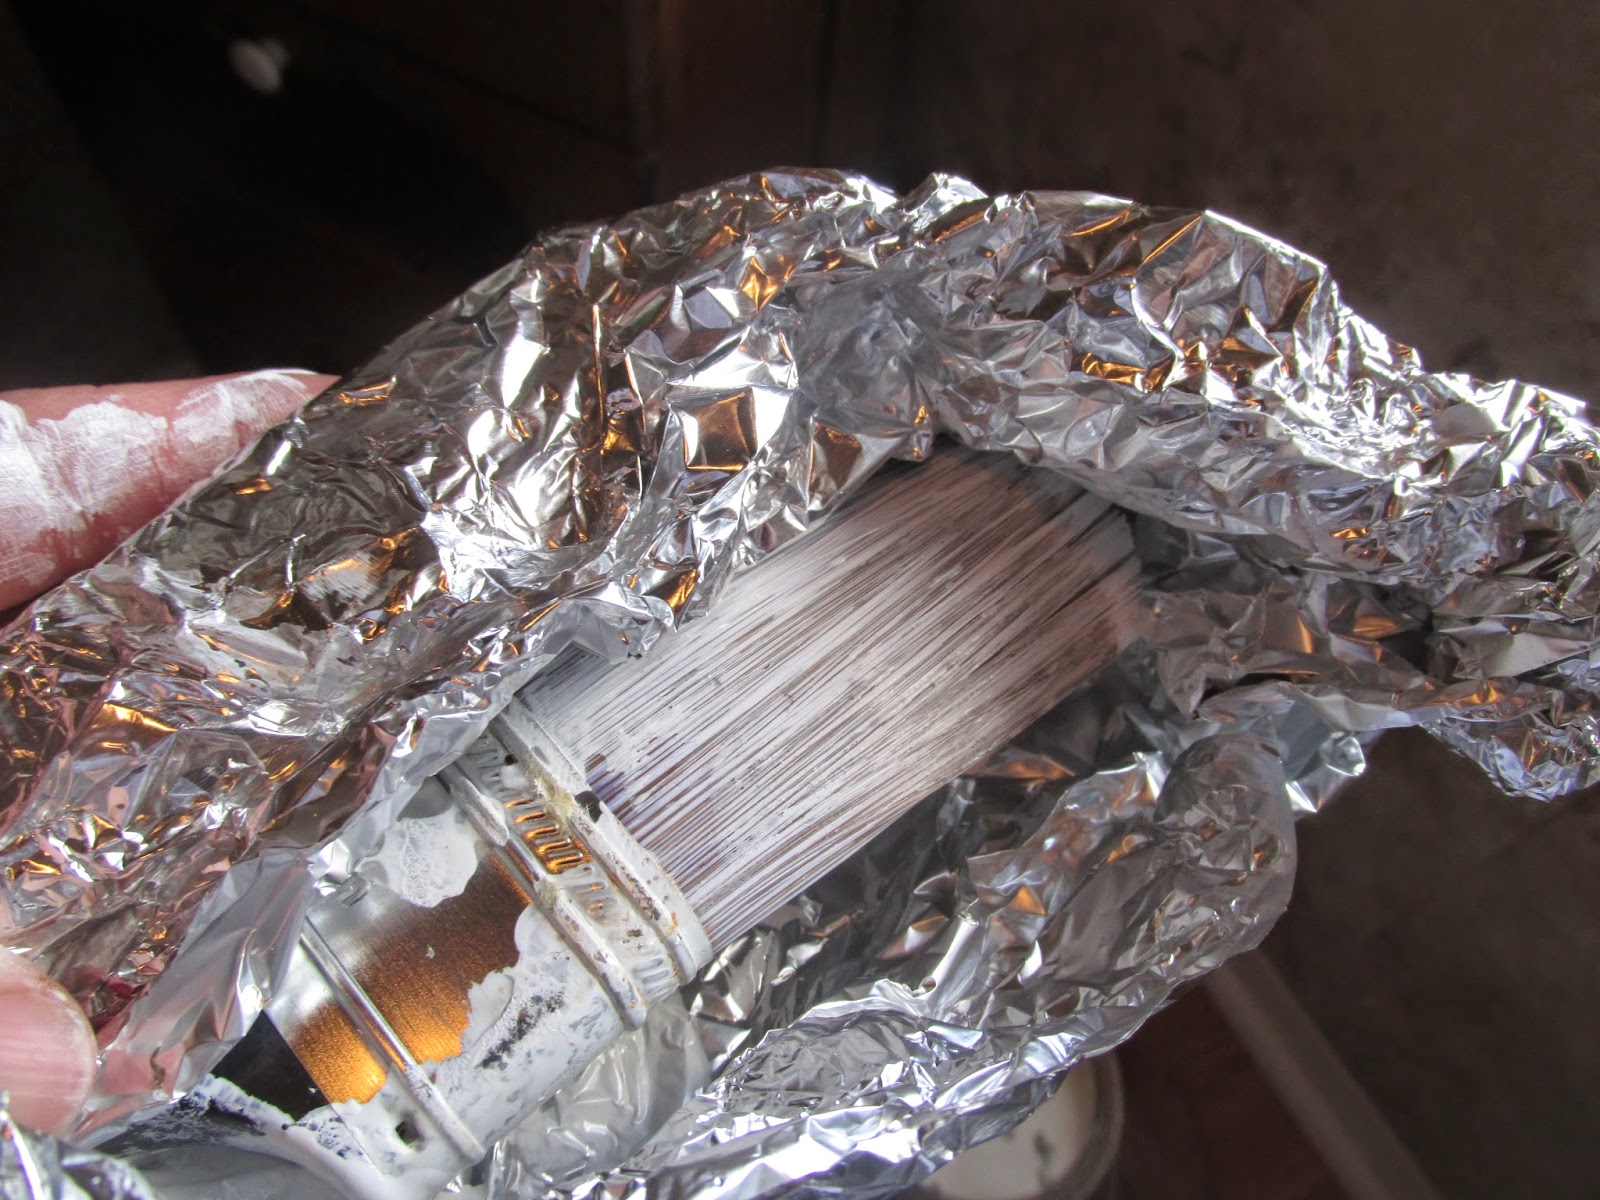 Using aluminum to wrap used paint brushes -never would have thought!  